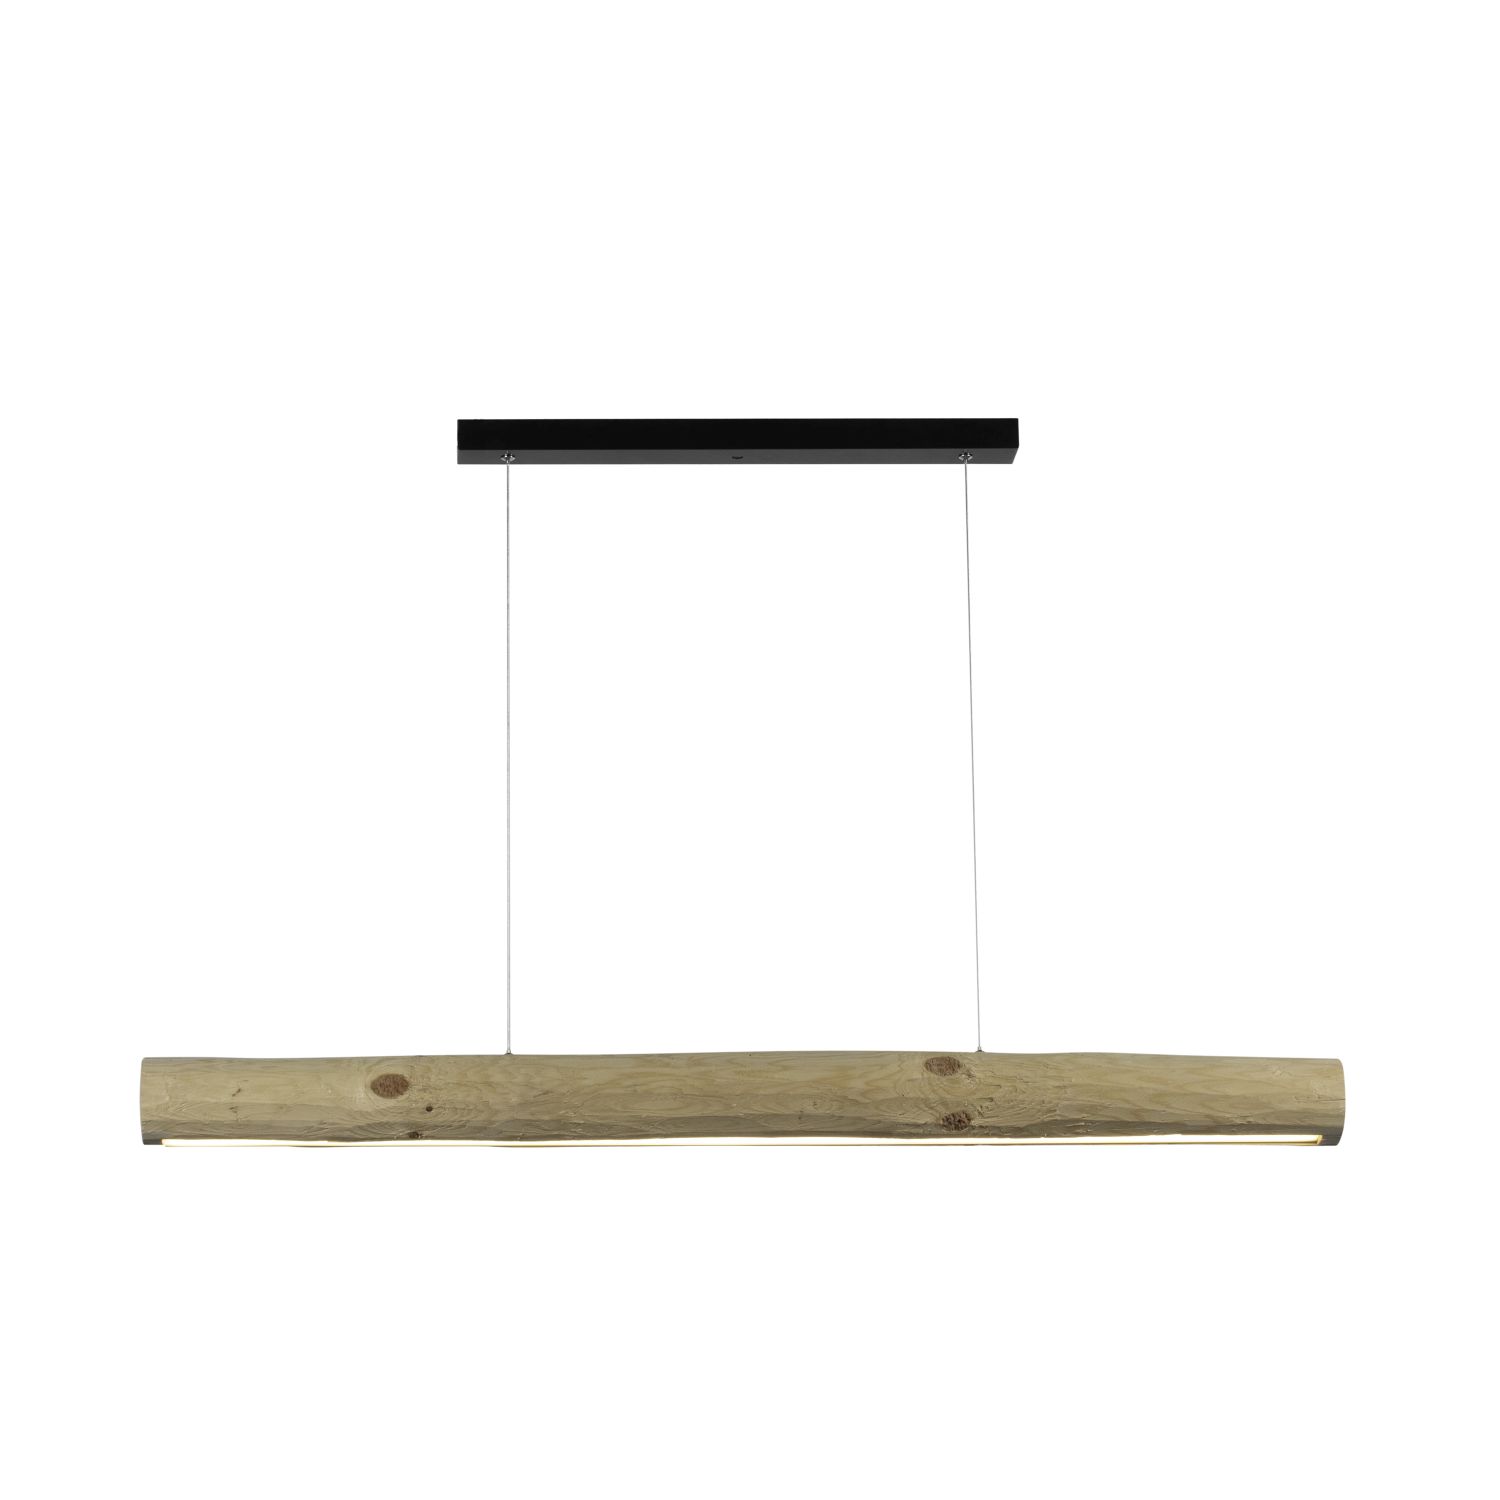 LED Hängelampe Touch dimmbar Holz 33W 115cm lang